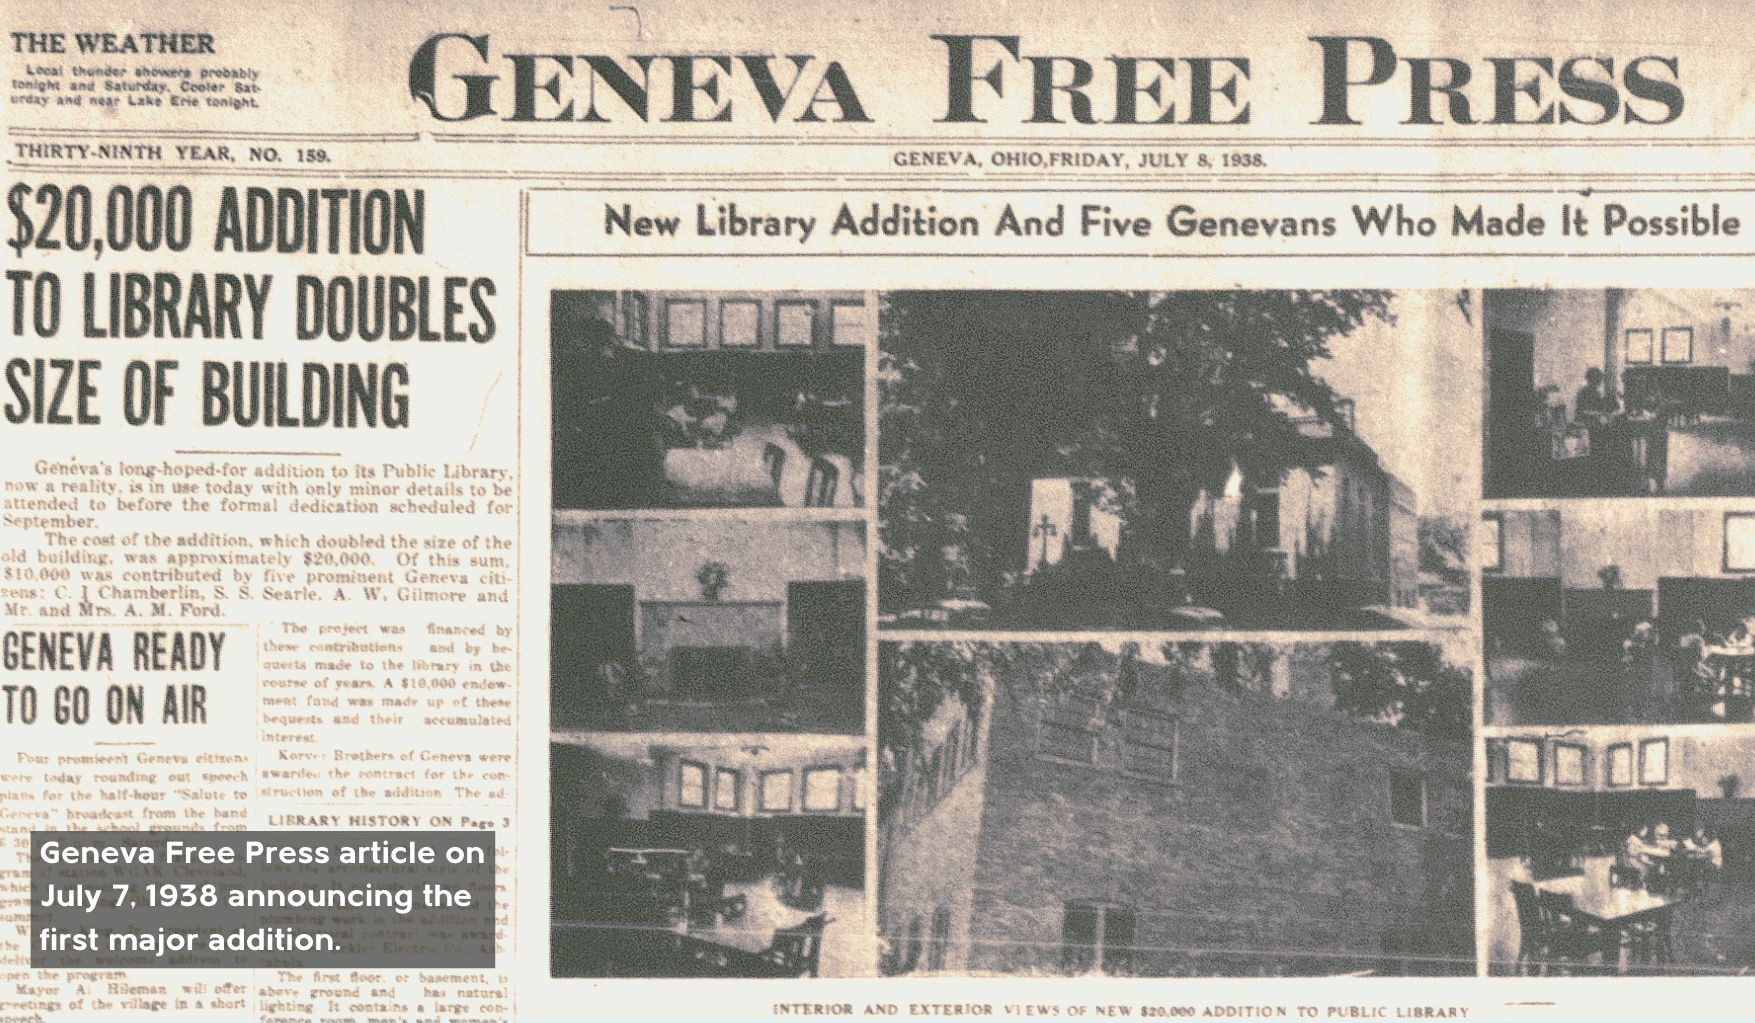 Image of Geneva Free Press article on July 7, 1938 announcing the first major addition to the Geneva Library.